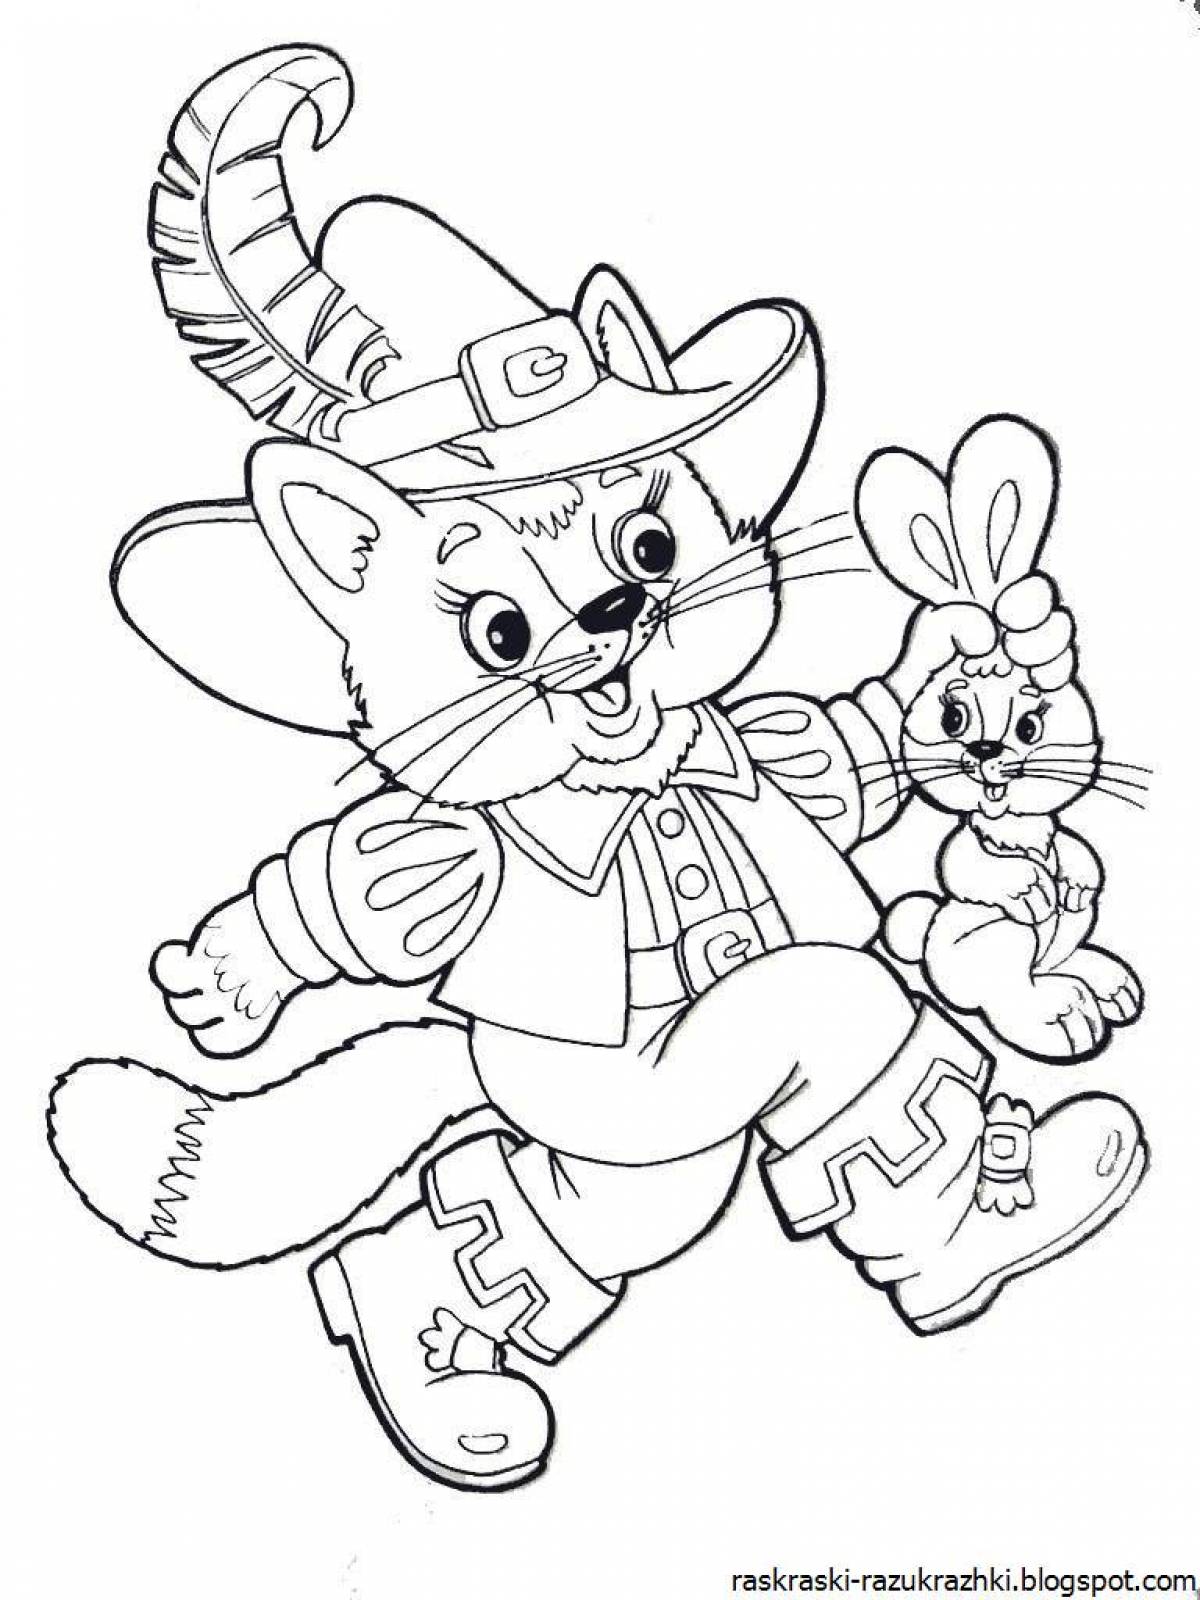 Adorable Puss in Boots coloring book for kids